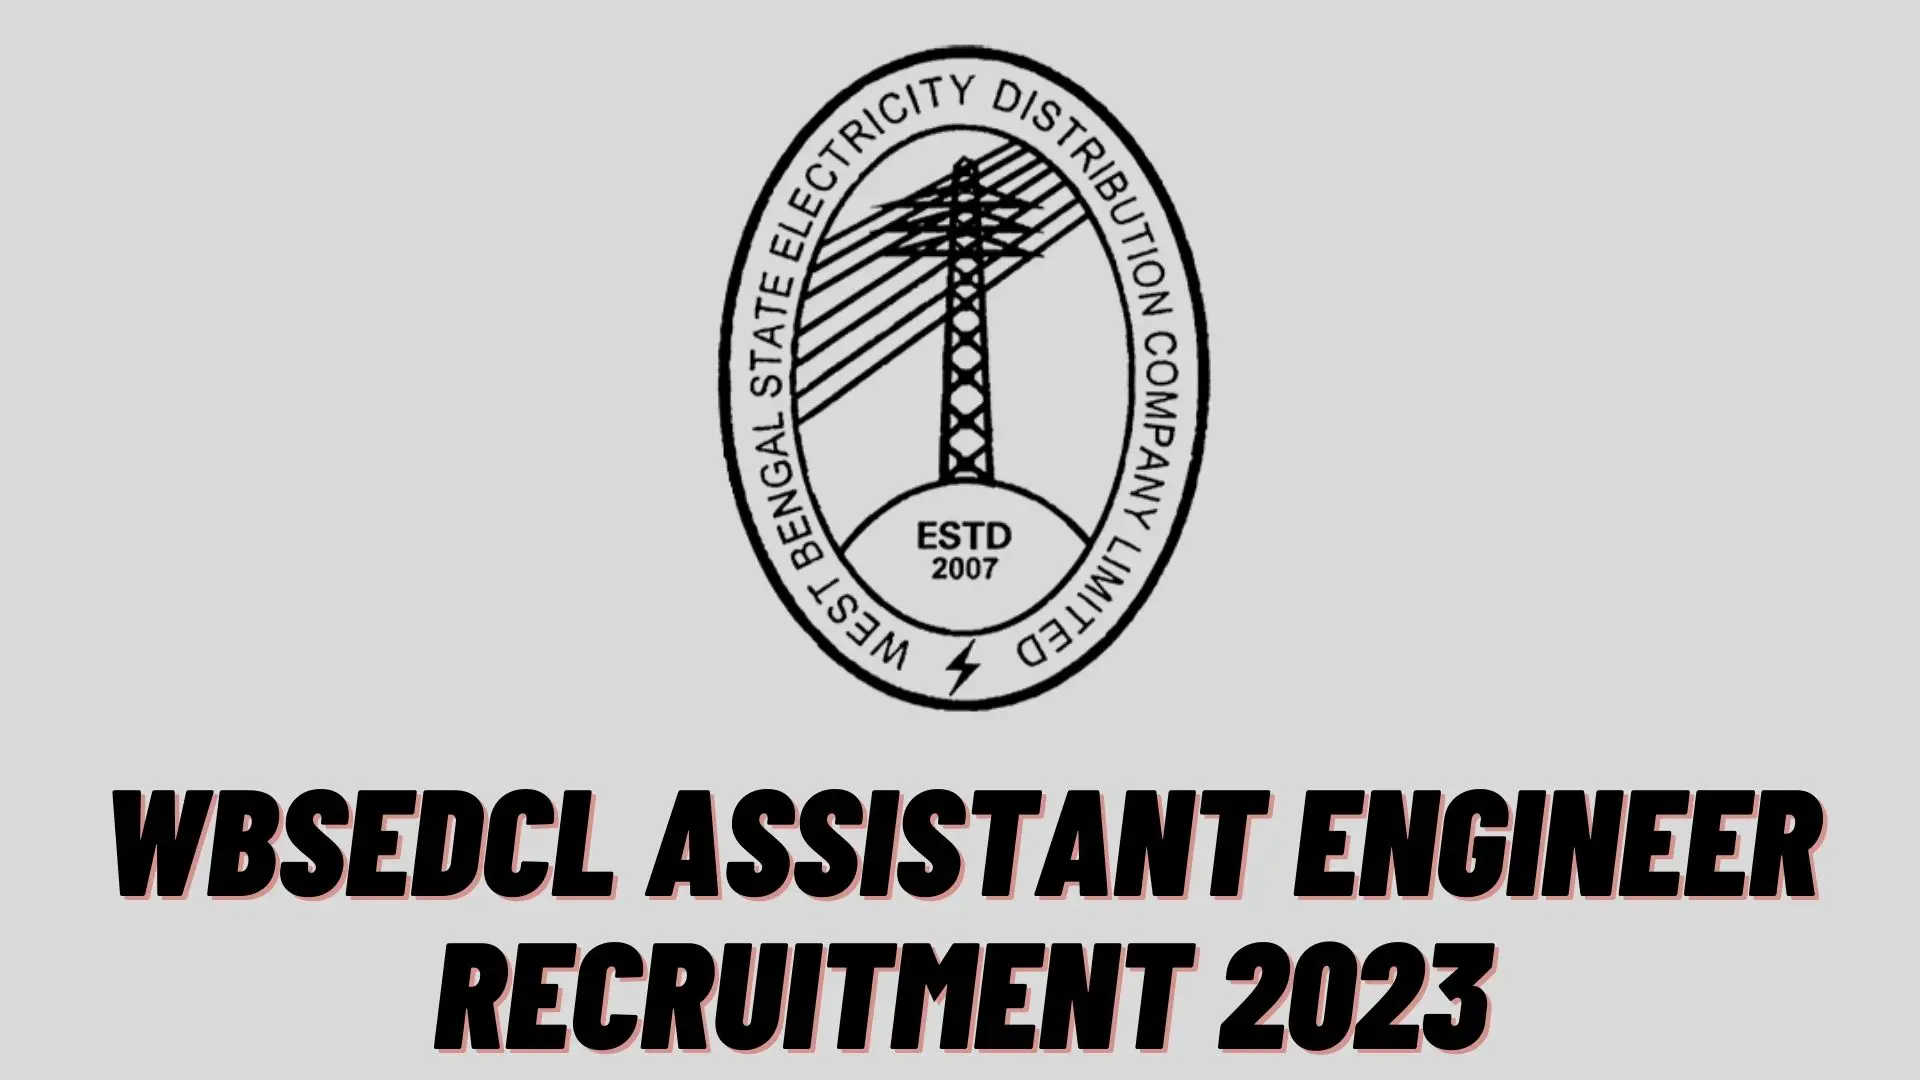 WBSEDCL Assistant Engineer Recruitment 2023